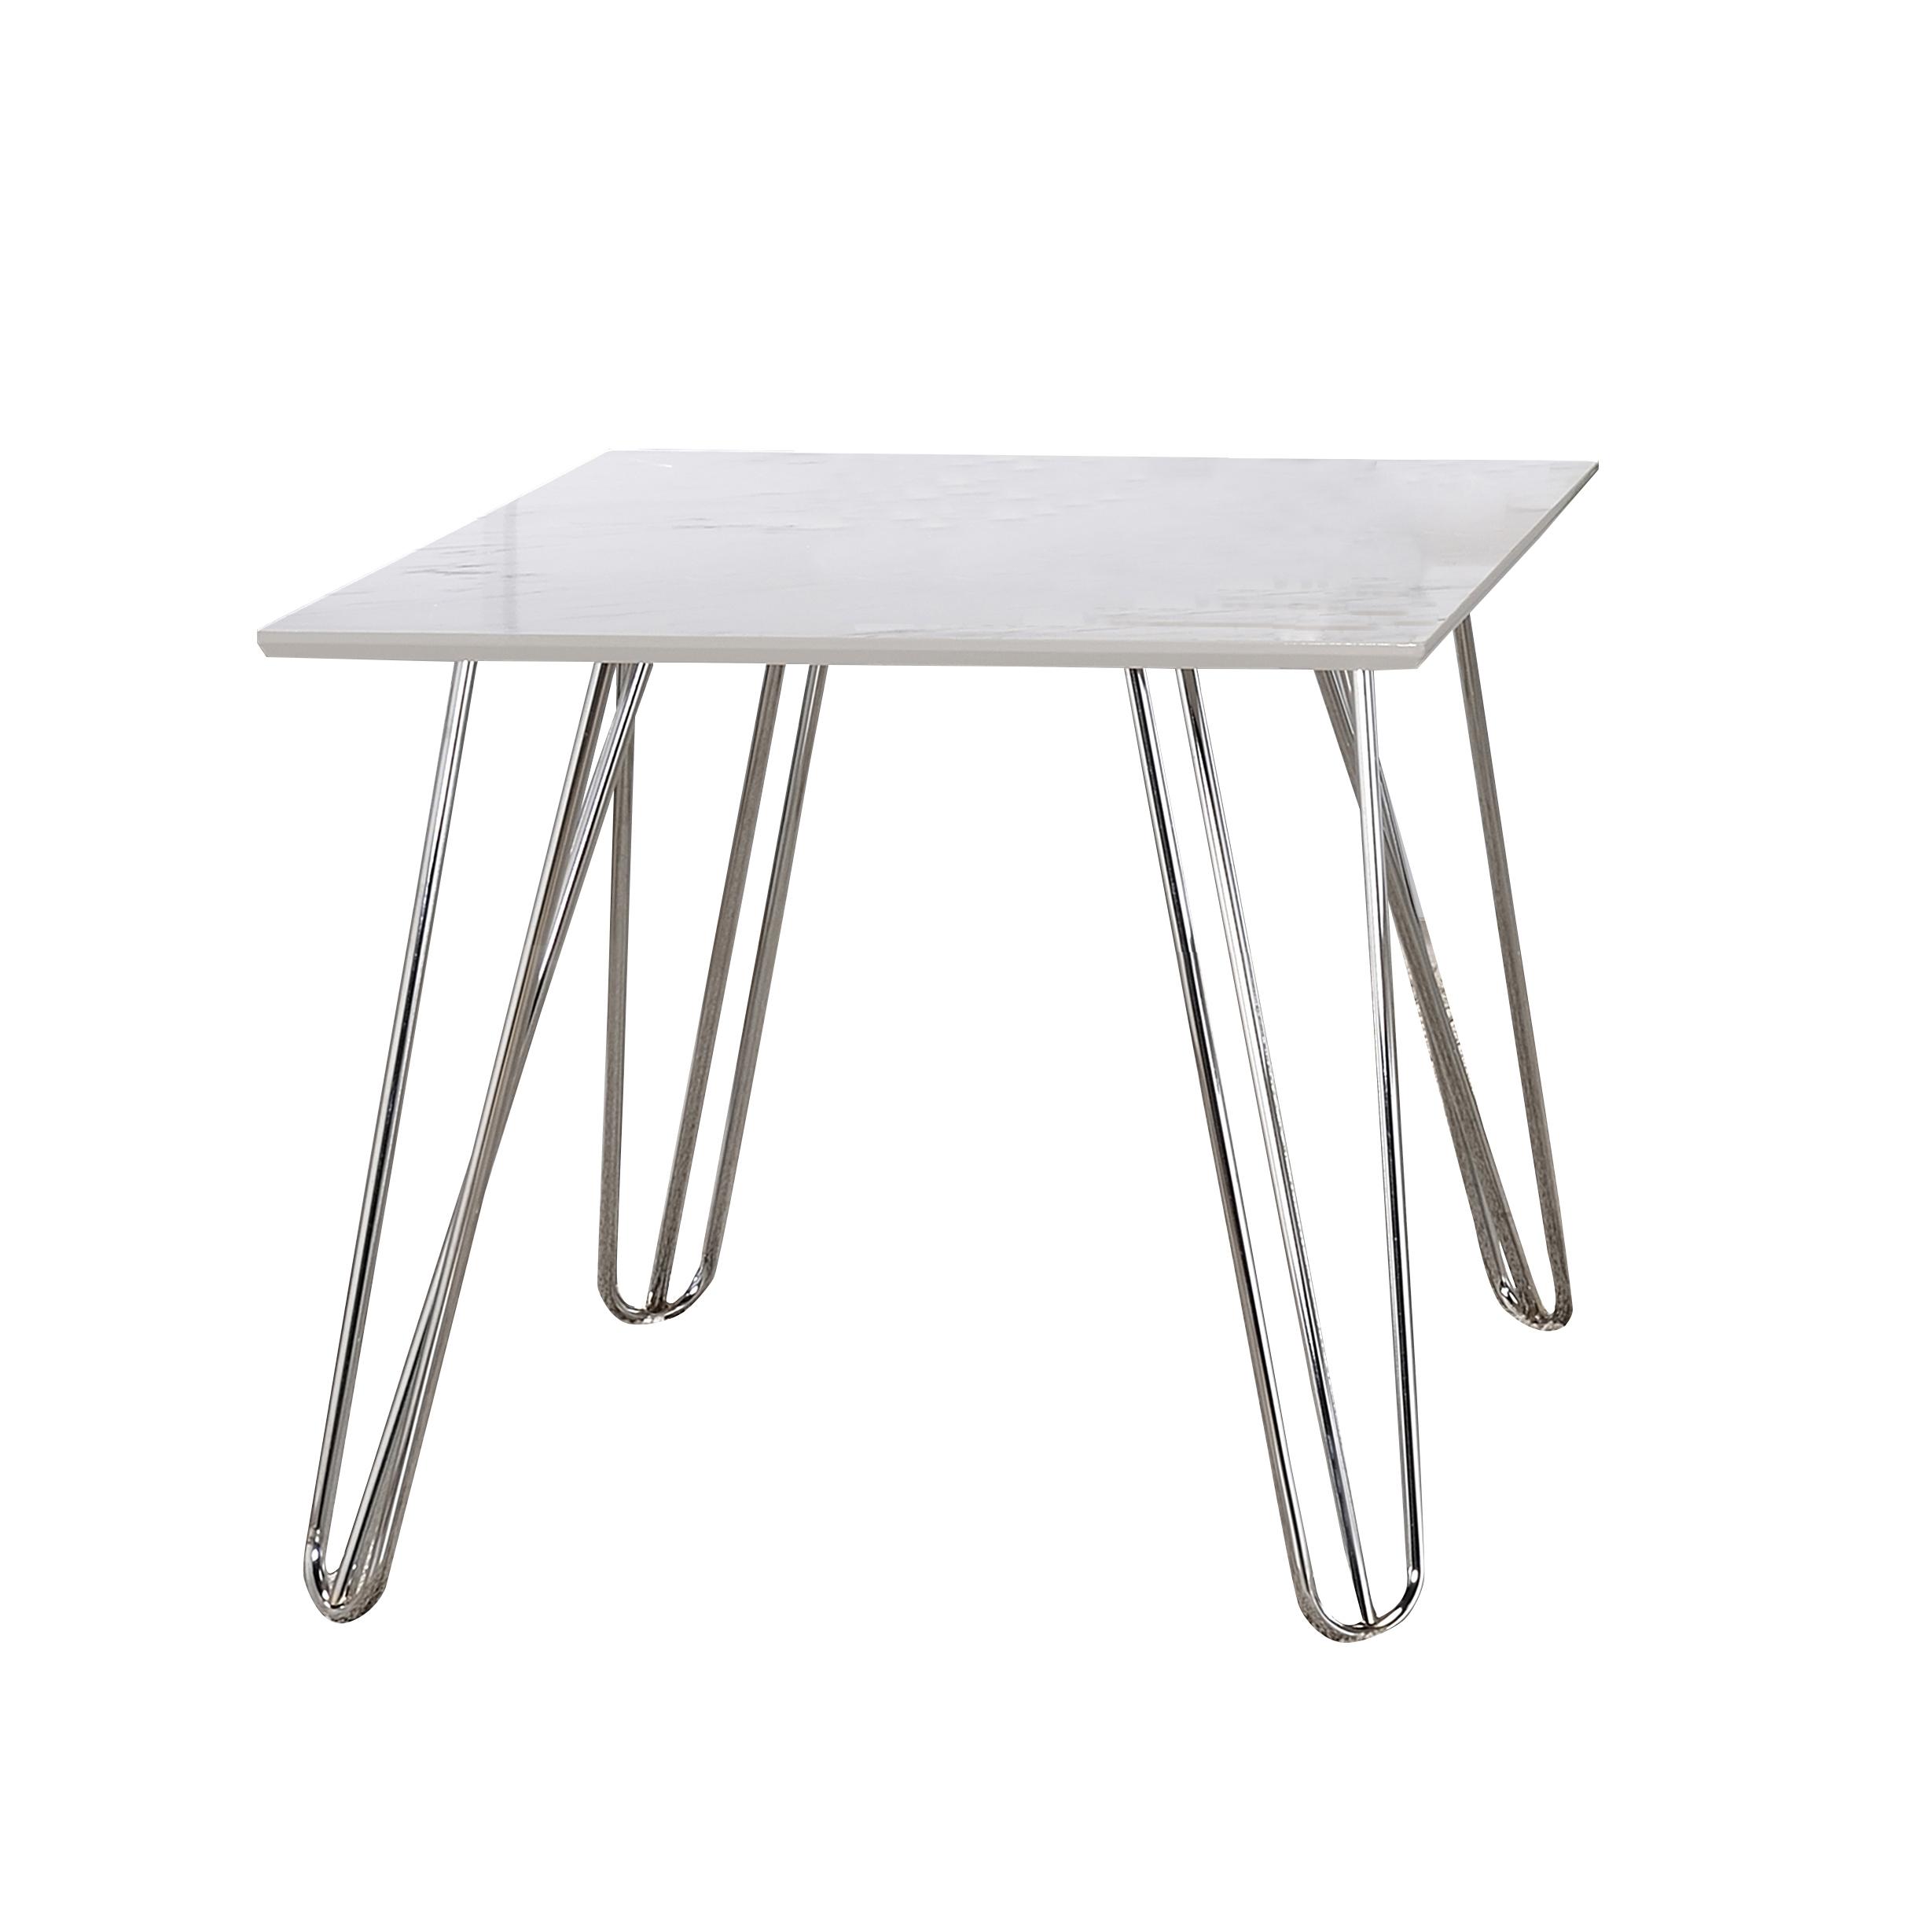 Contemporary End Table 724287 724287 in Chrome, White 